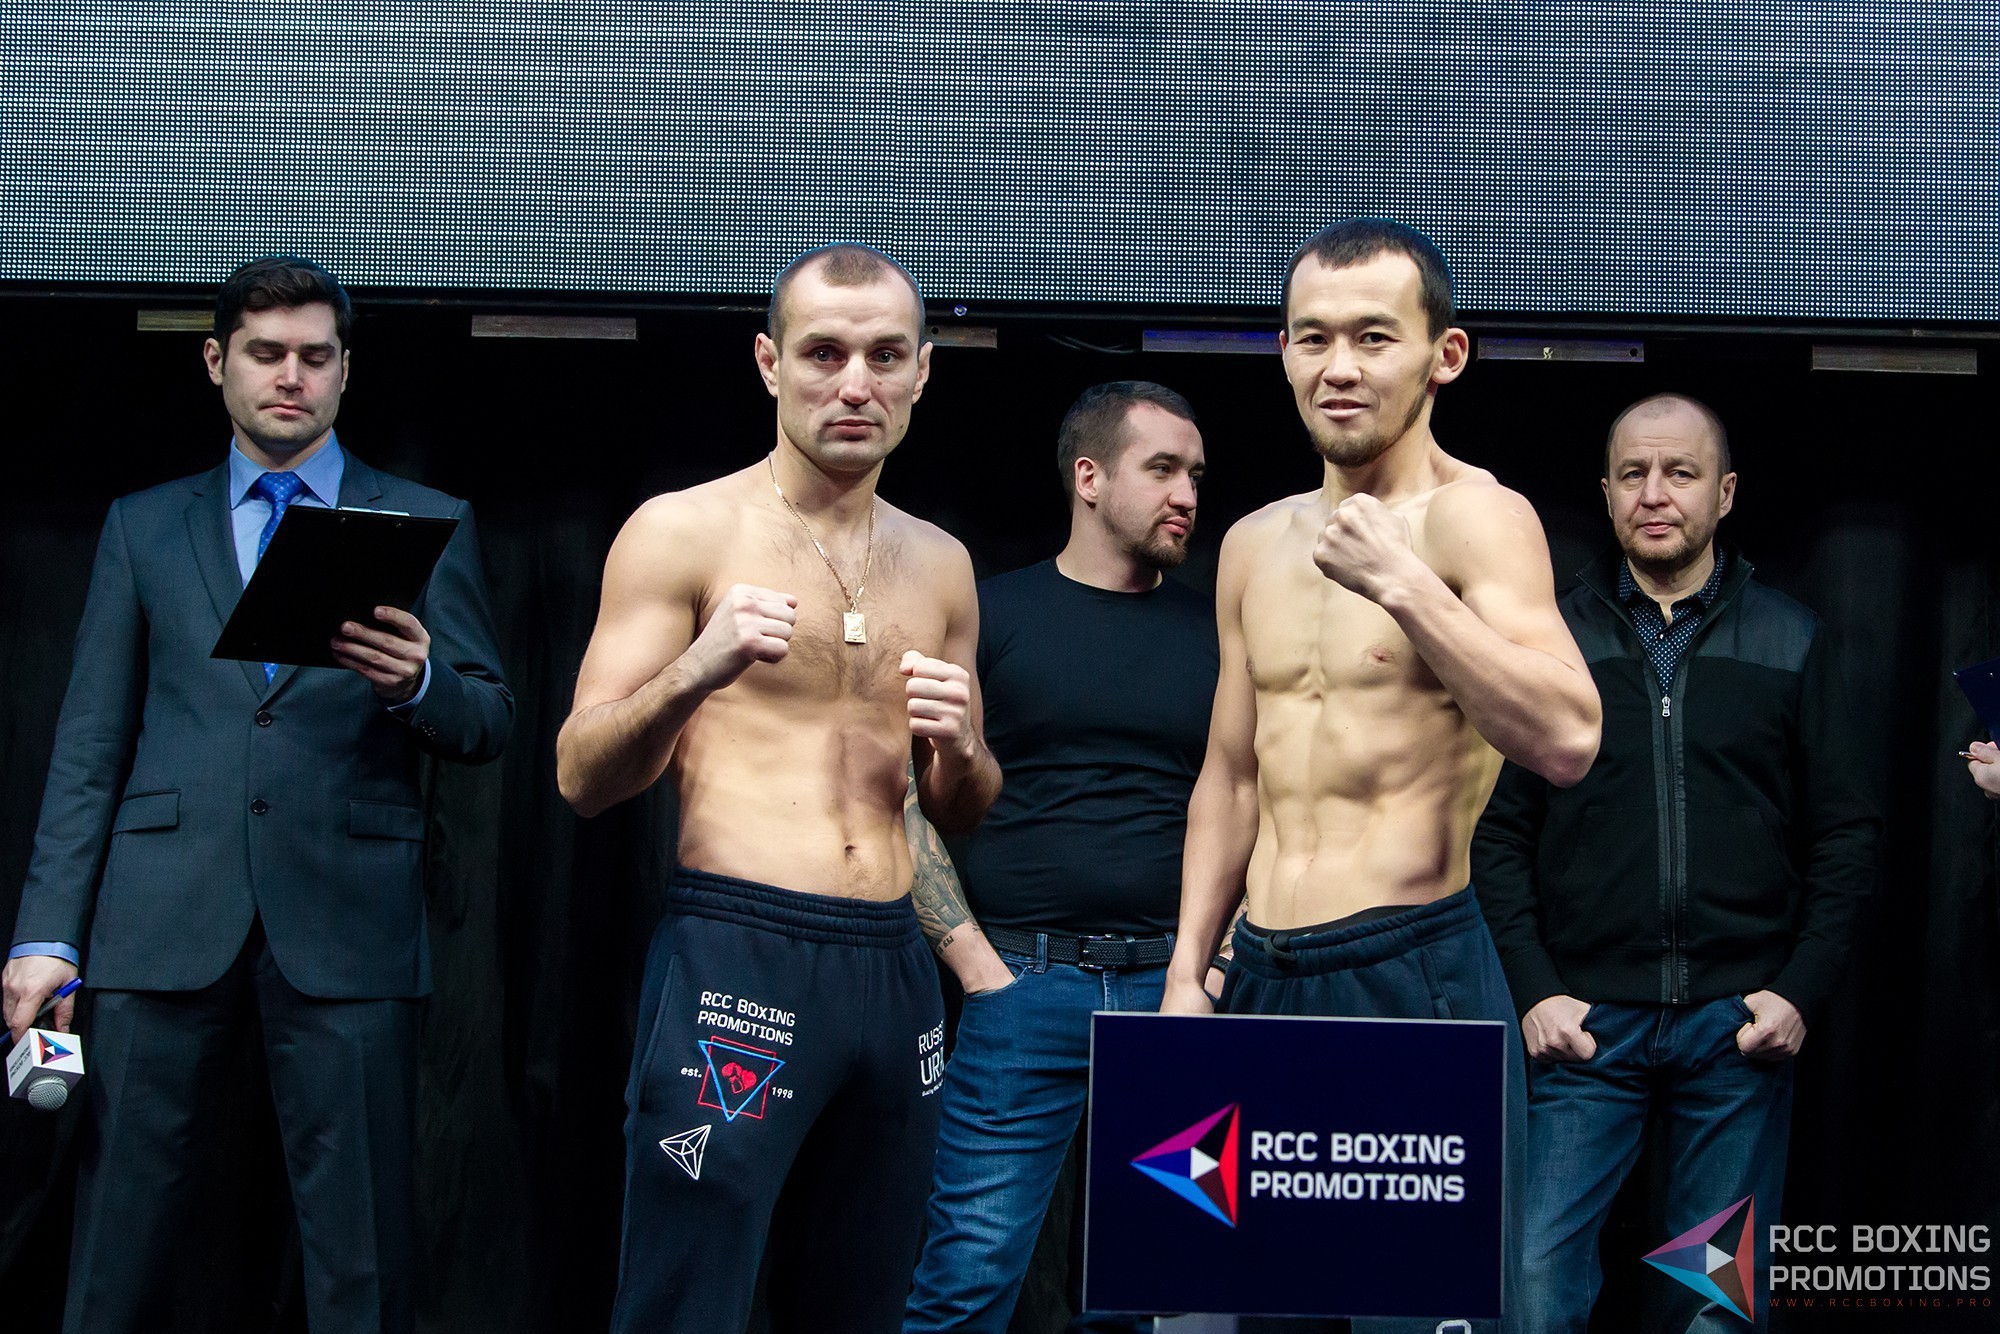 Boxing promotions. Взвешивание участников. Взвешивание участников Extra Round. RCC Boxing афиша. RCC Boxing взвешивание.